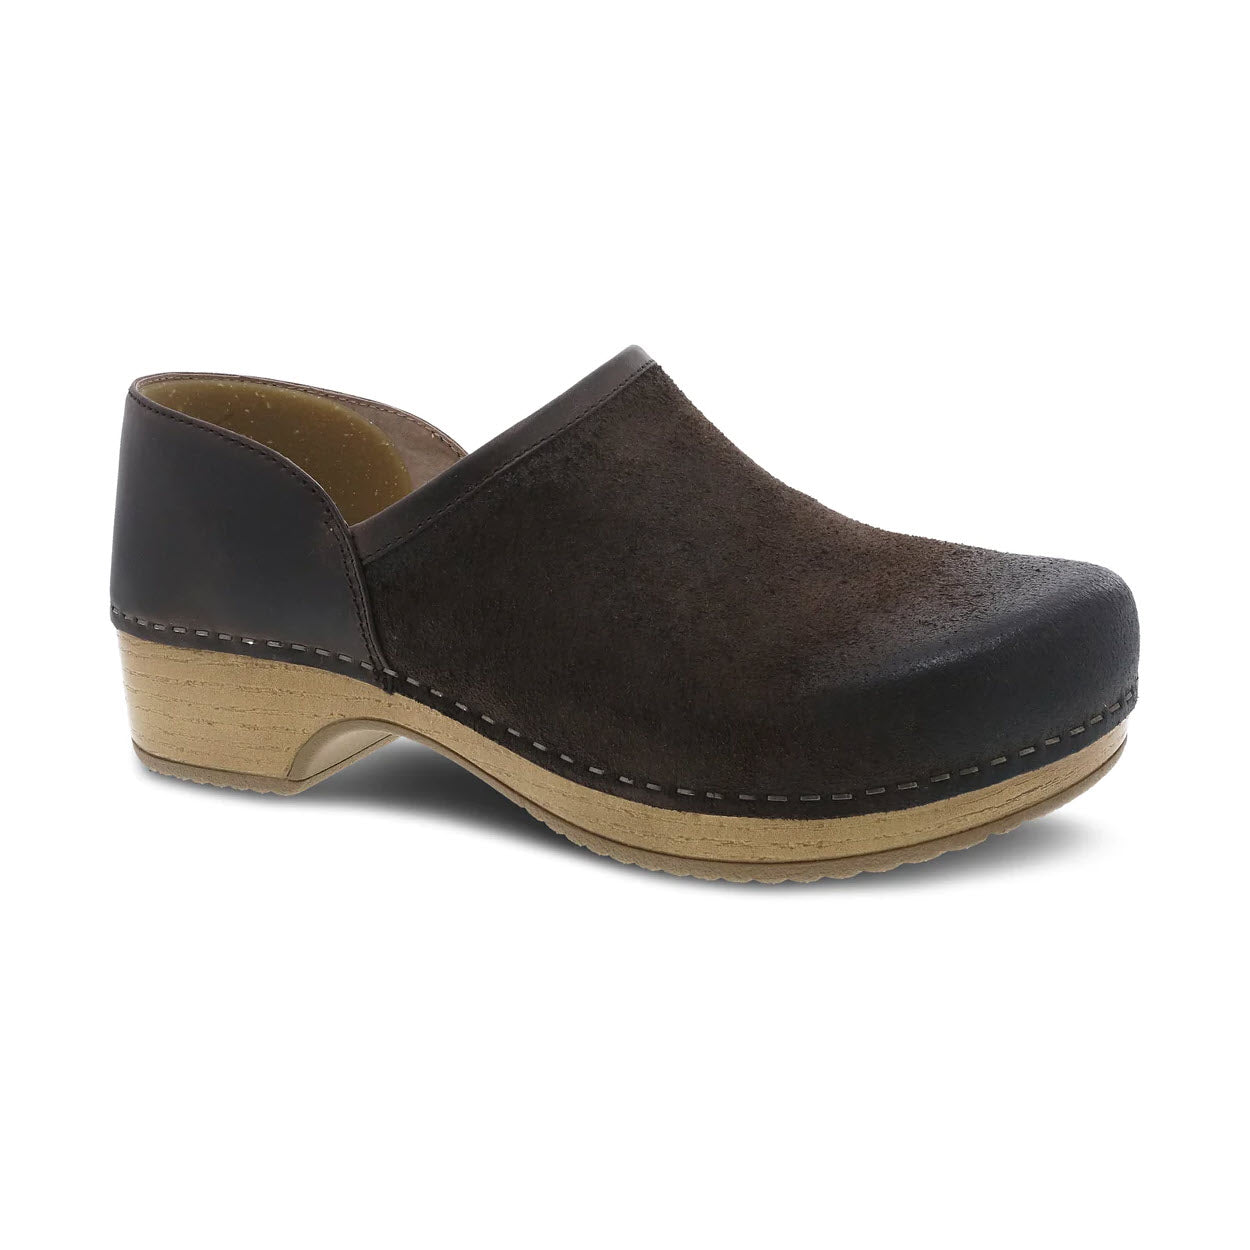 A single Dansko Brenna Chocolate Burnished - Women clog with a wooden sole and black front, isolated on a white background.